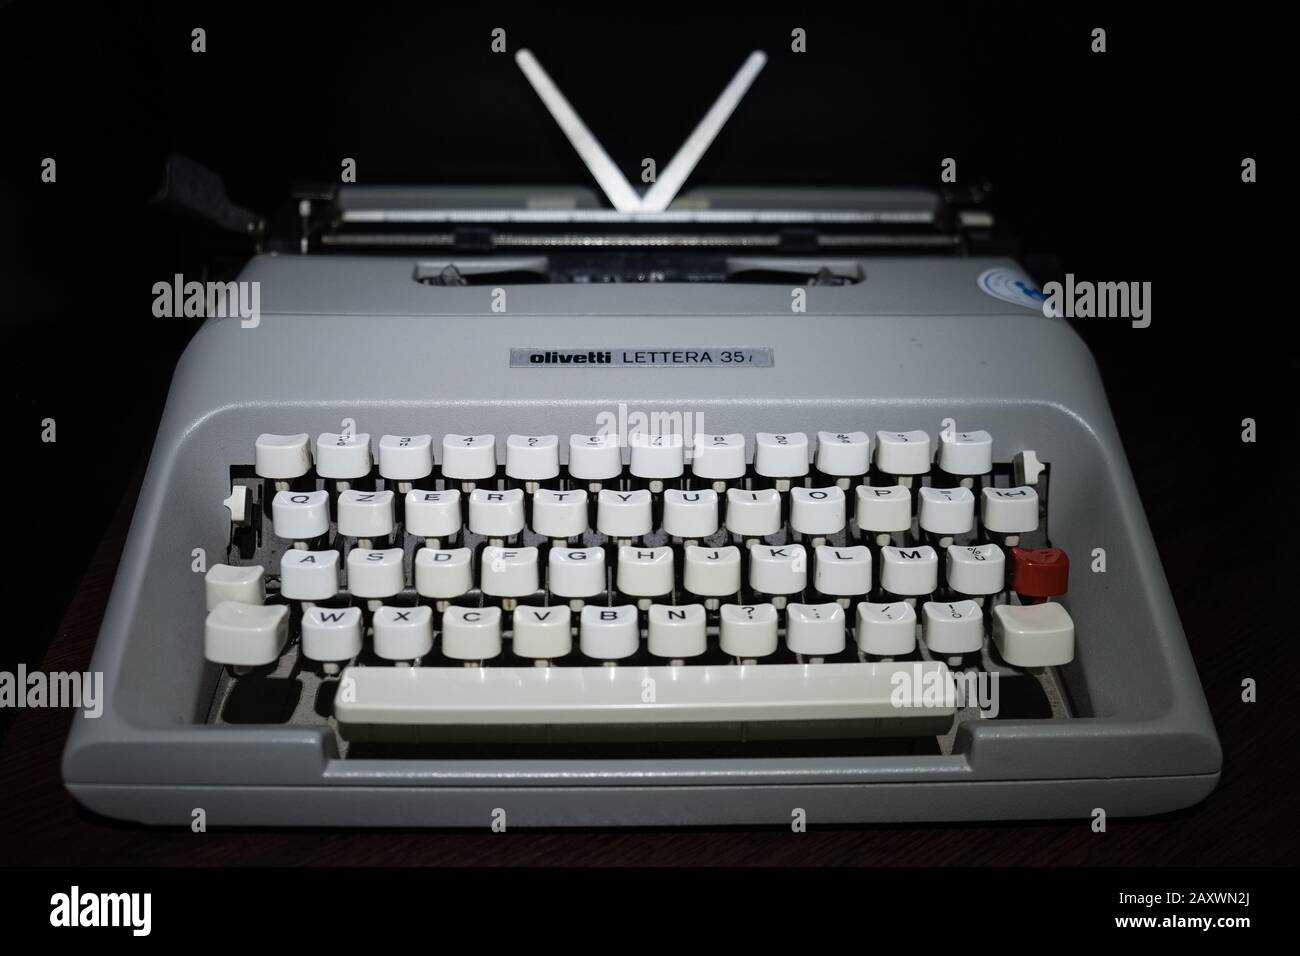 Typewriter 'Olivetti' model 'Letter 35' photographed frontally on a dark background. Stock Photo